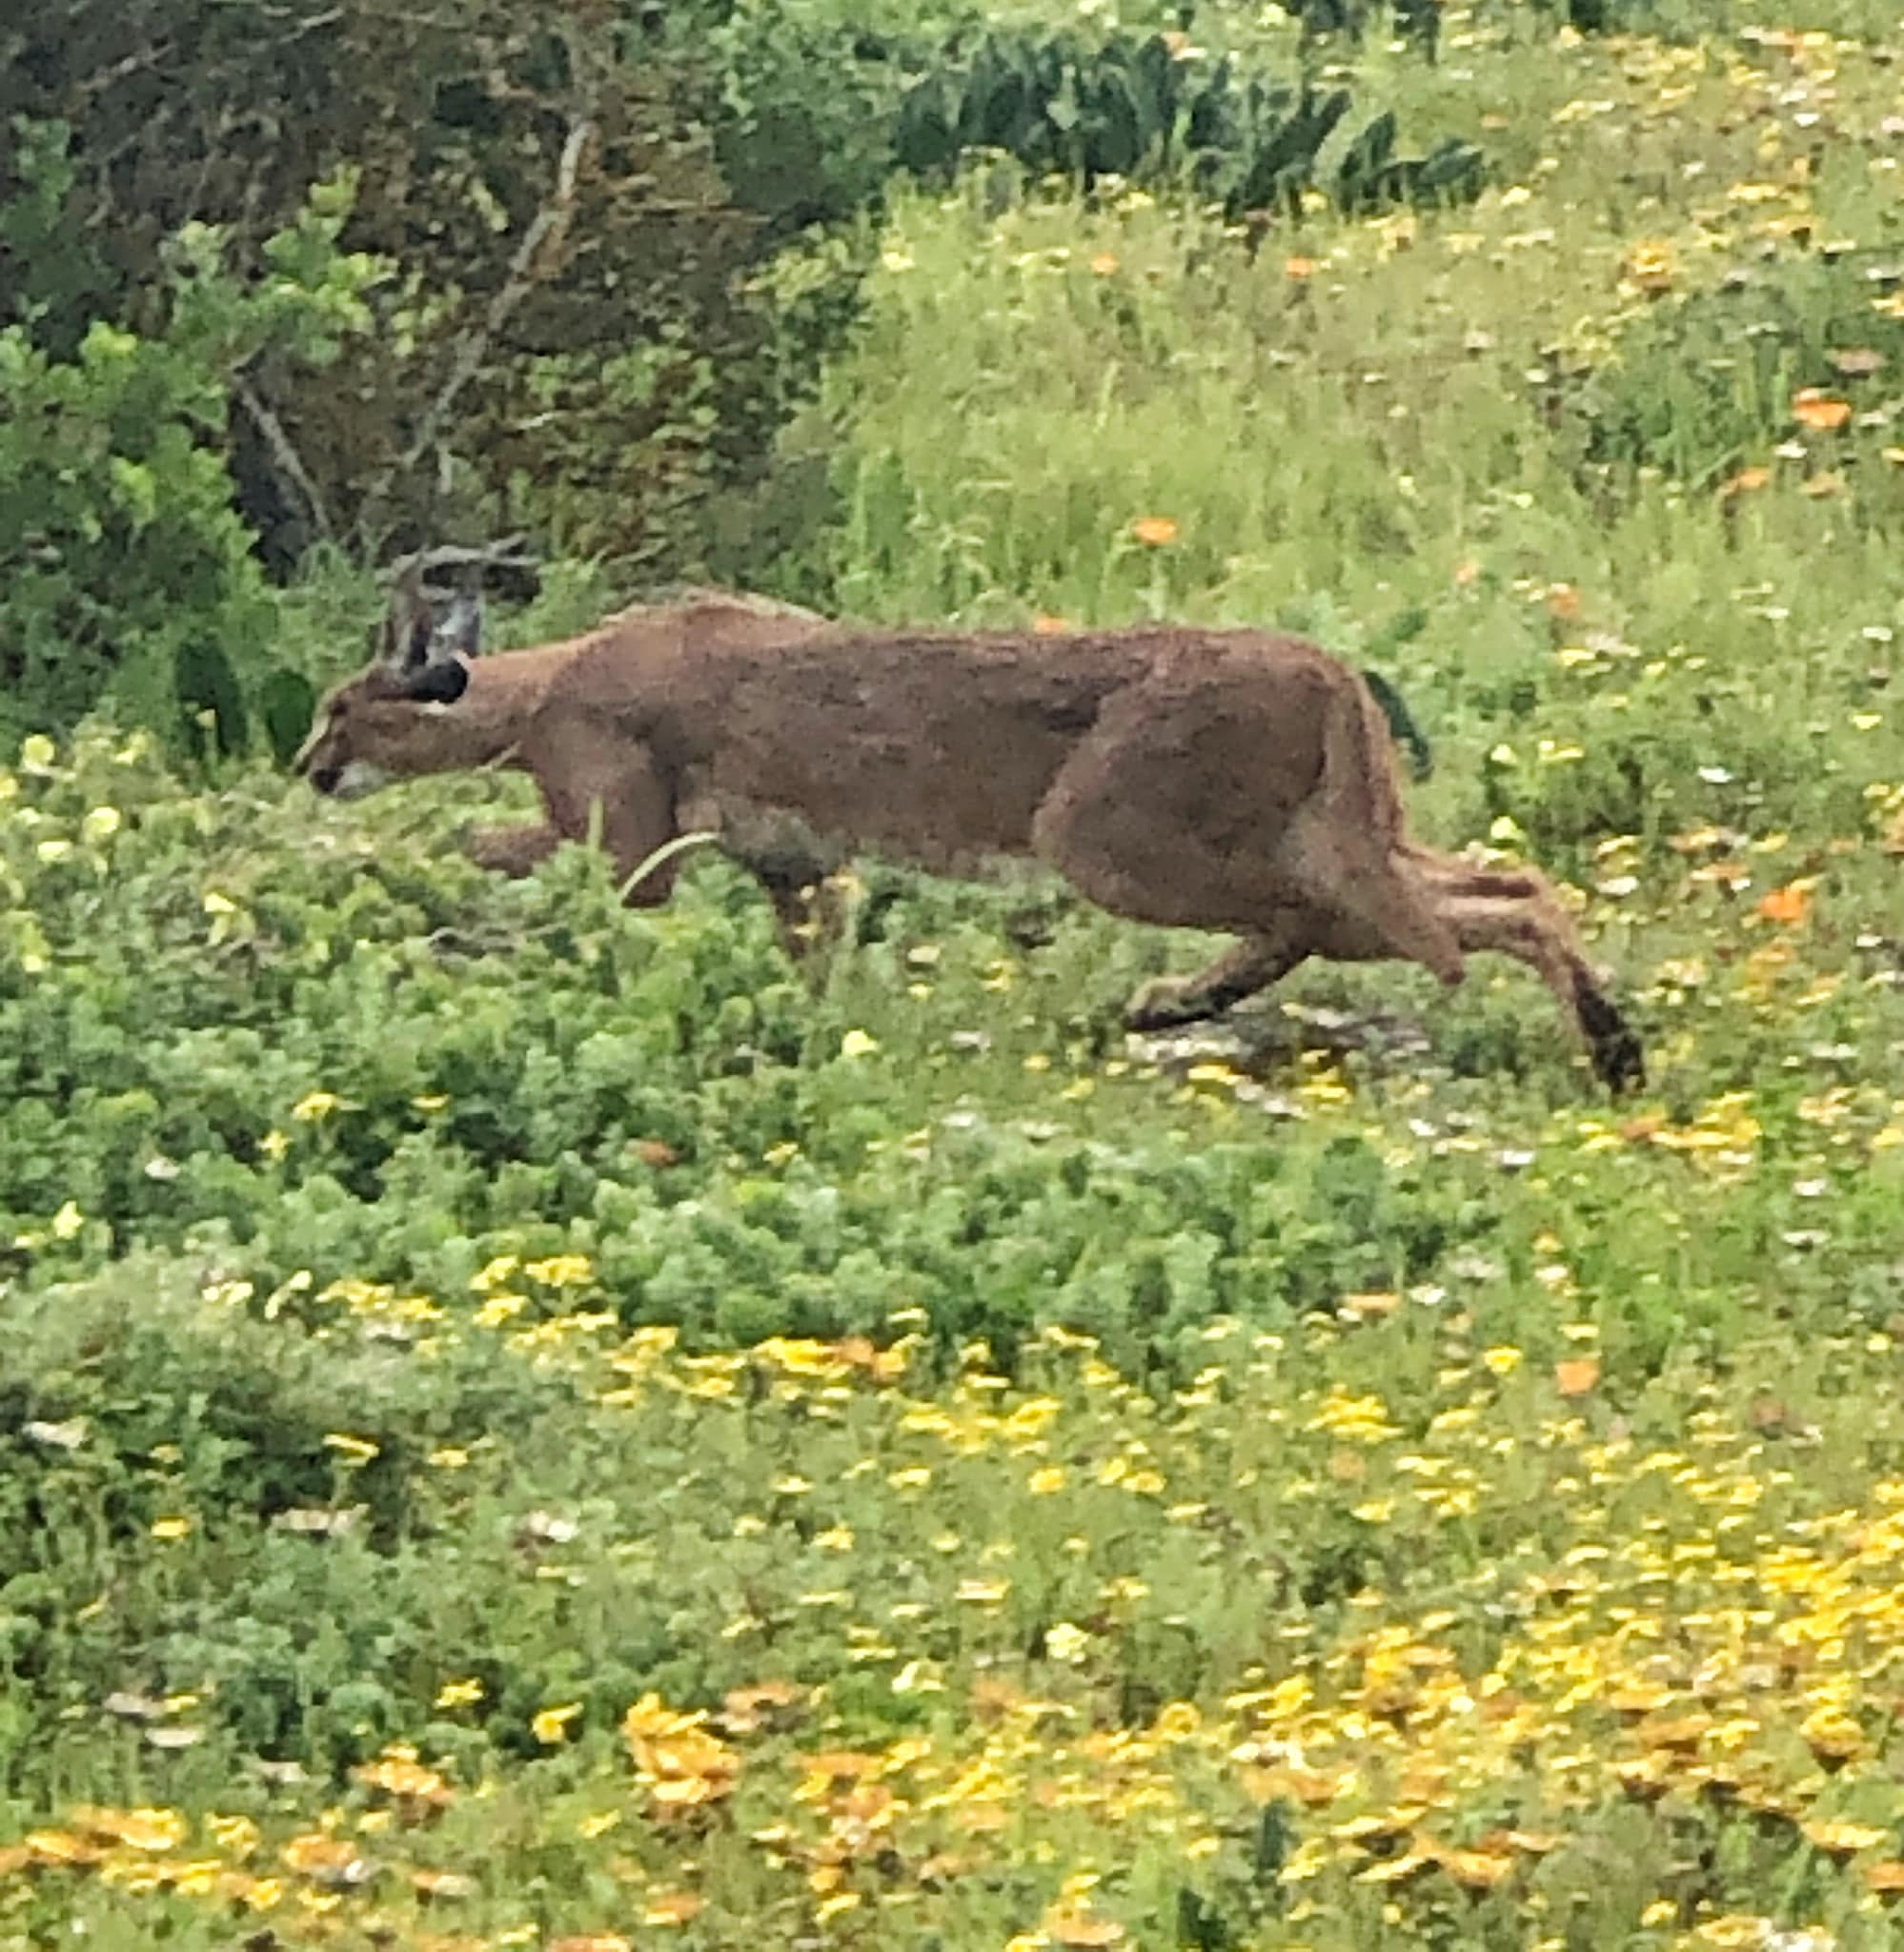 The perfect springtime sighting? A caracal in the wildflowers 